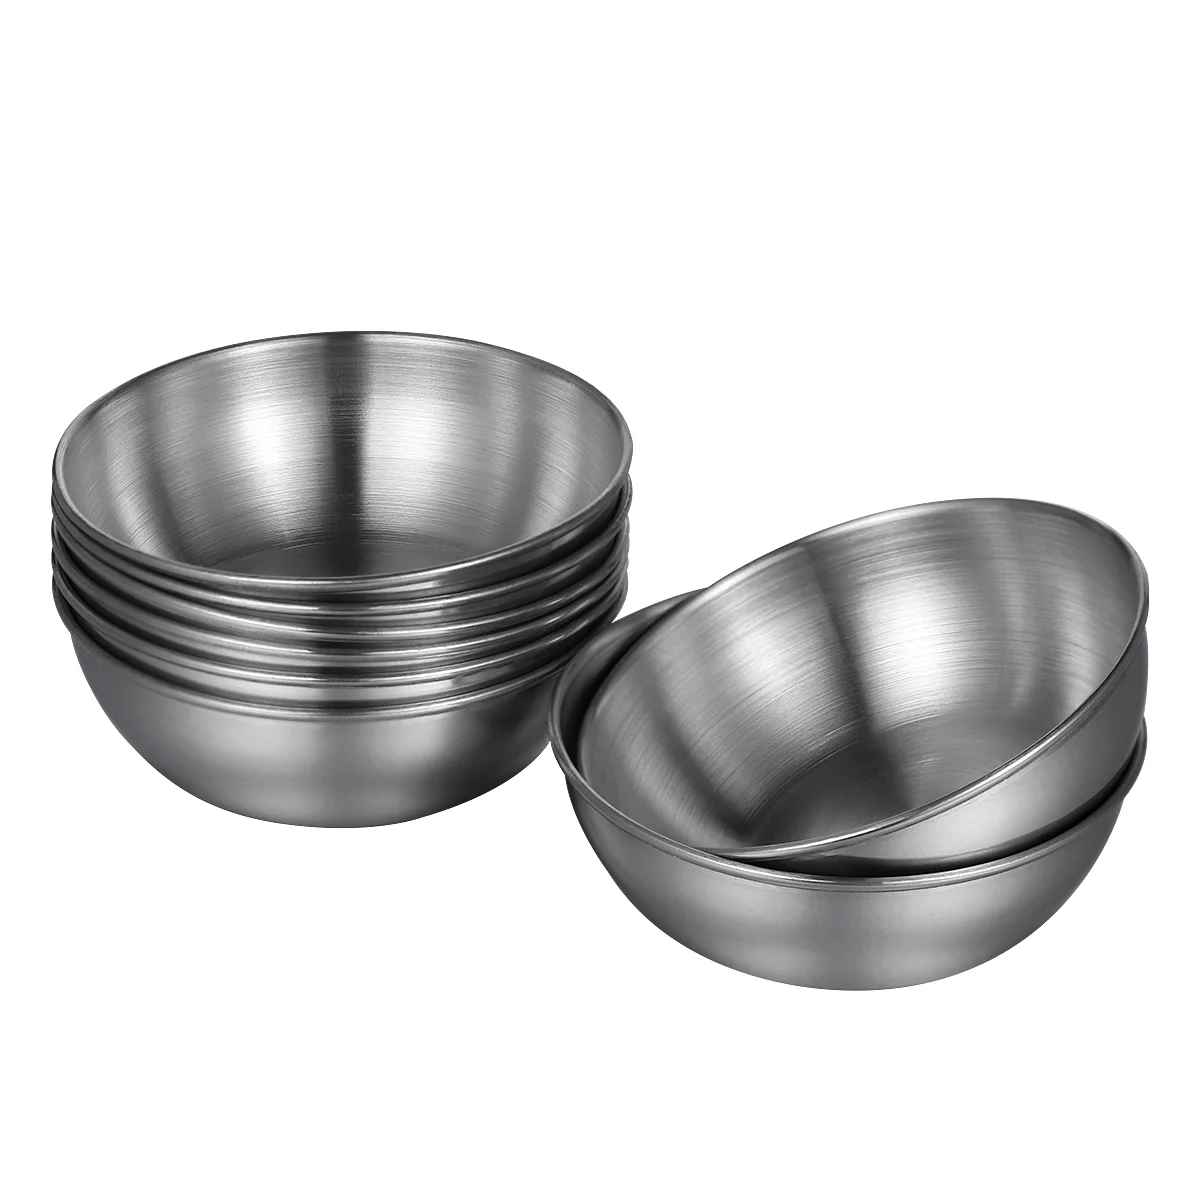 

8 Sauce Dish Stainless steel Dipping Bowls Set Condiments Server Dishes Small Bowls Cups for Sushi Sauce, Soy,- Chip and